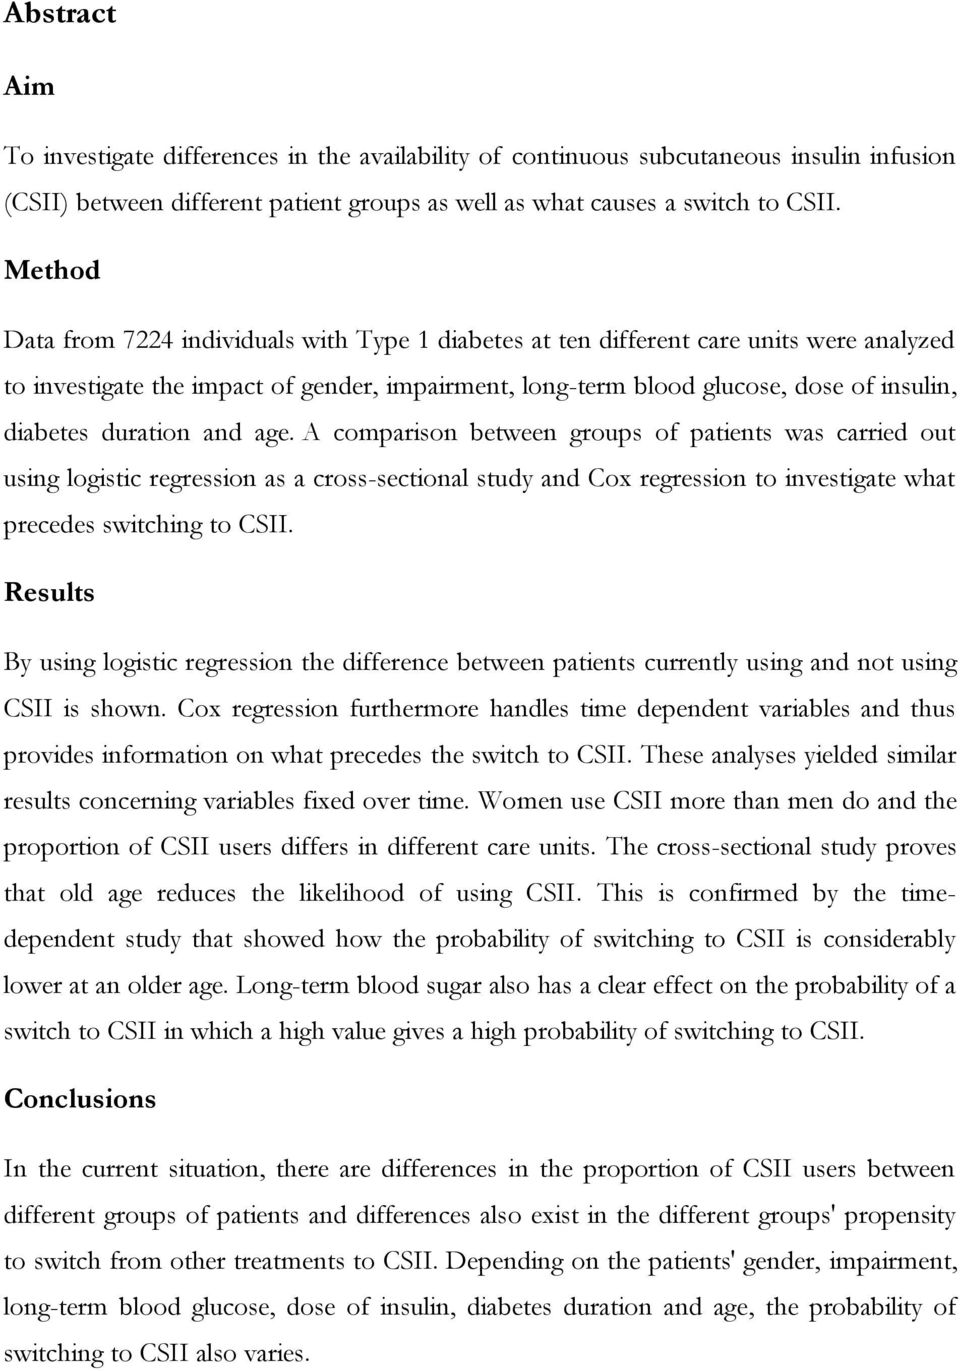 duration and age. A comparison between groups of patients was carried out using logistic regression as a cross-sectional study and Cox regression to investigate what precedes switching to CSII.